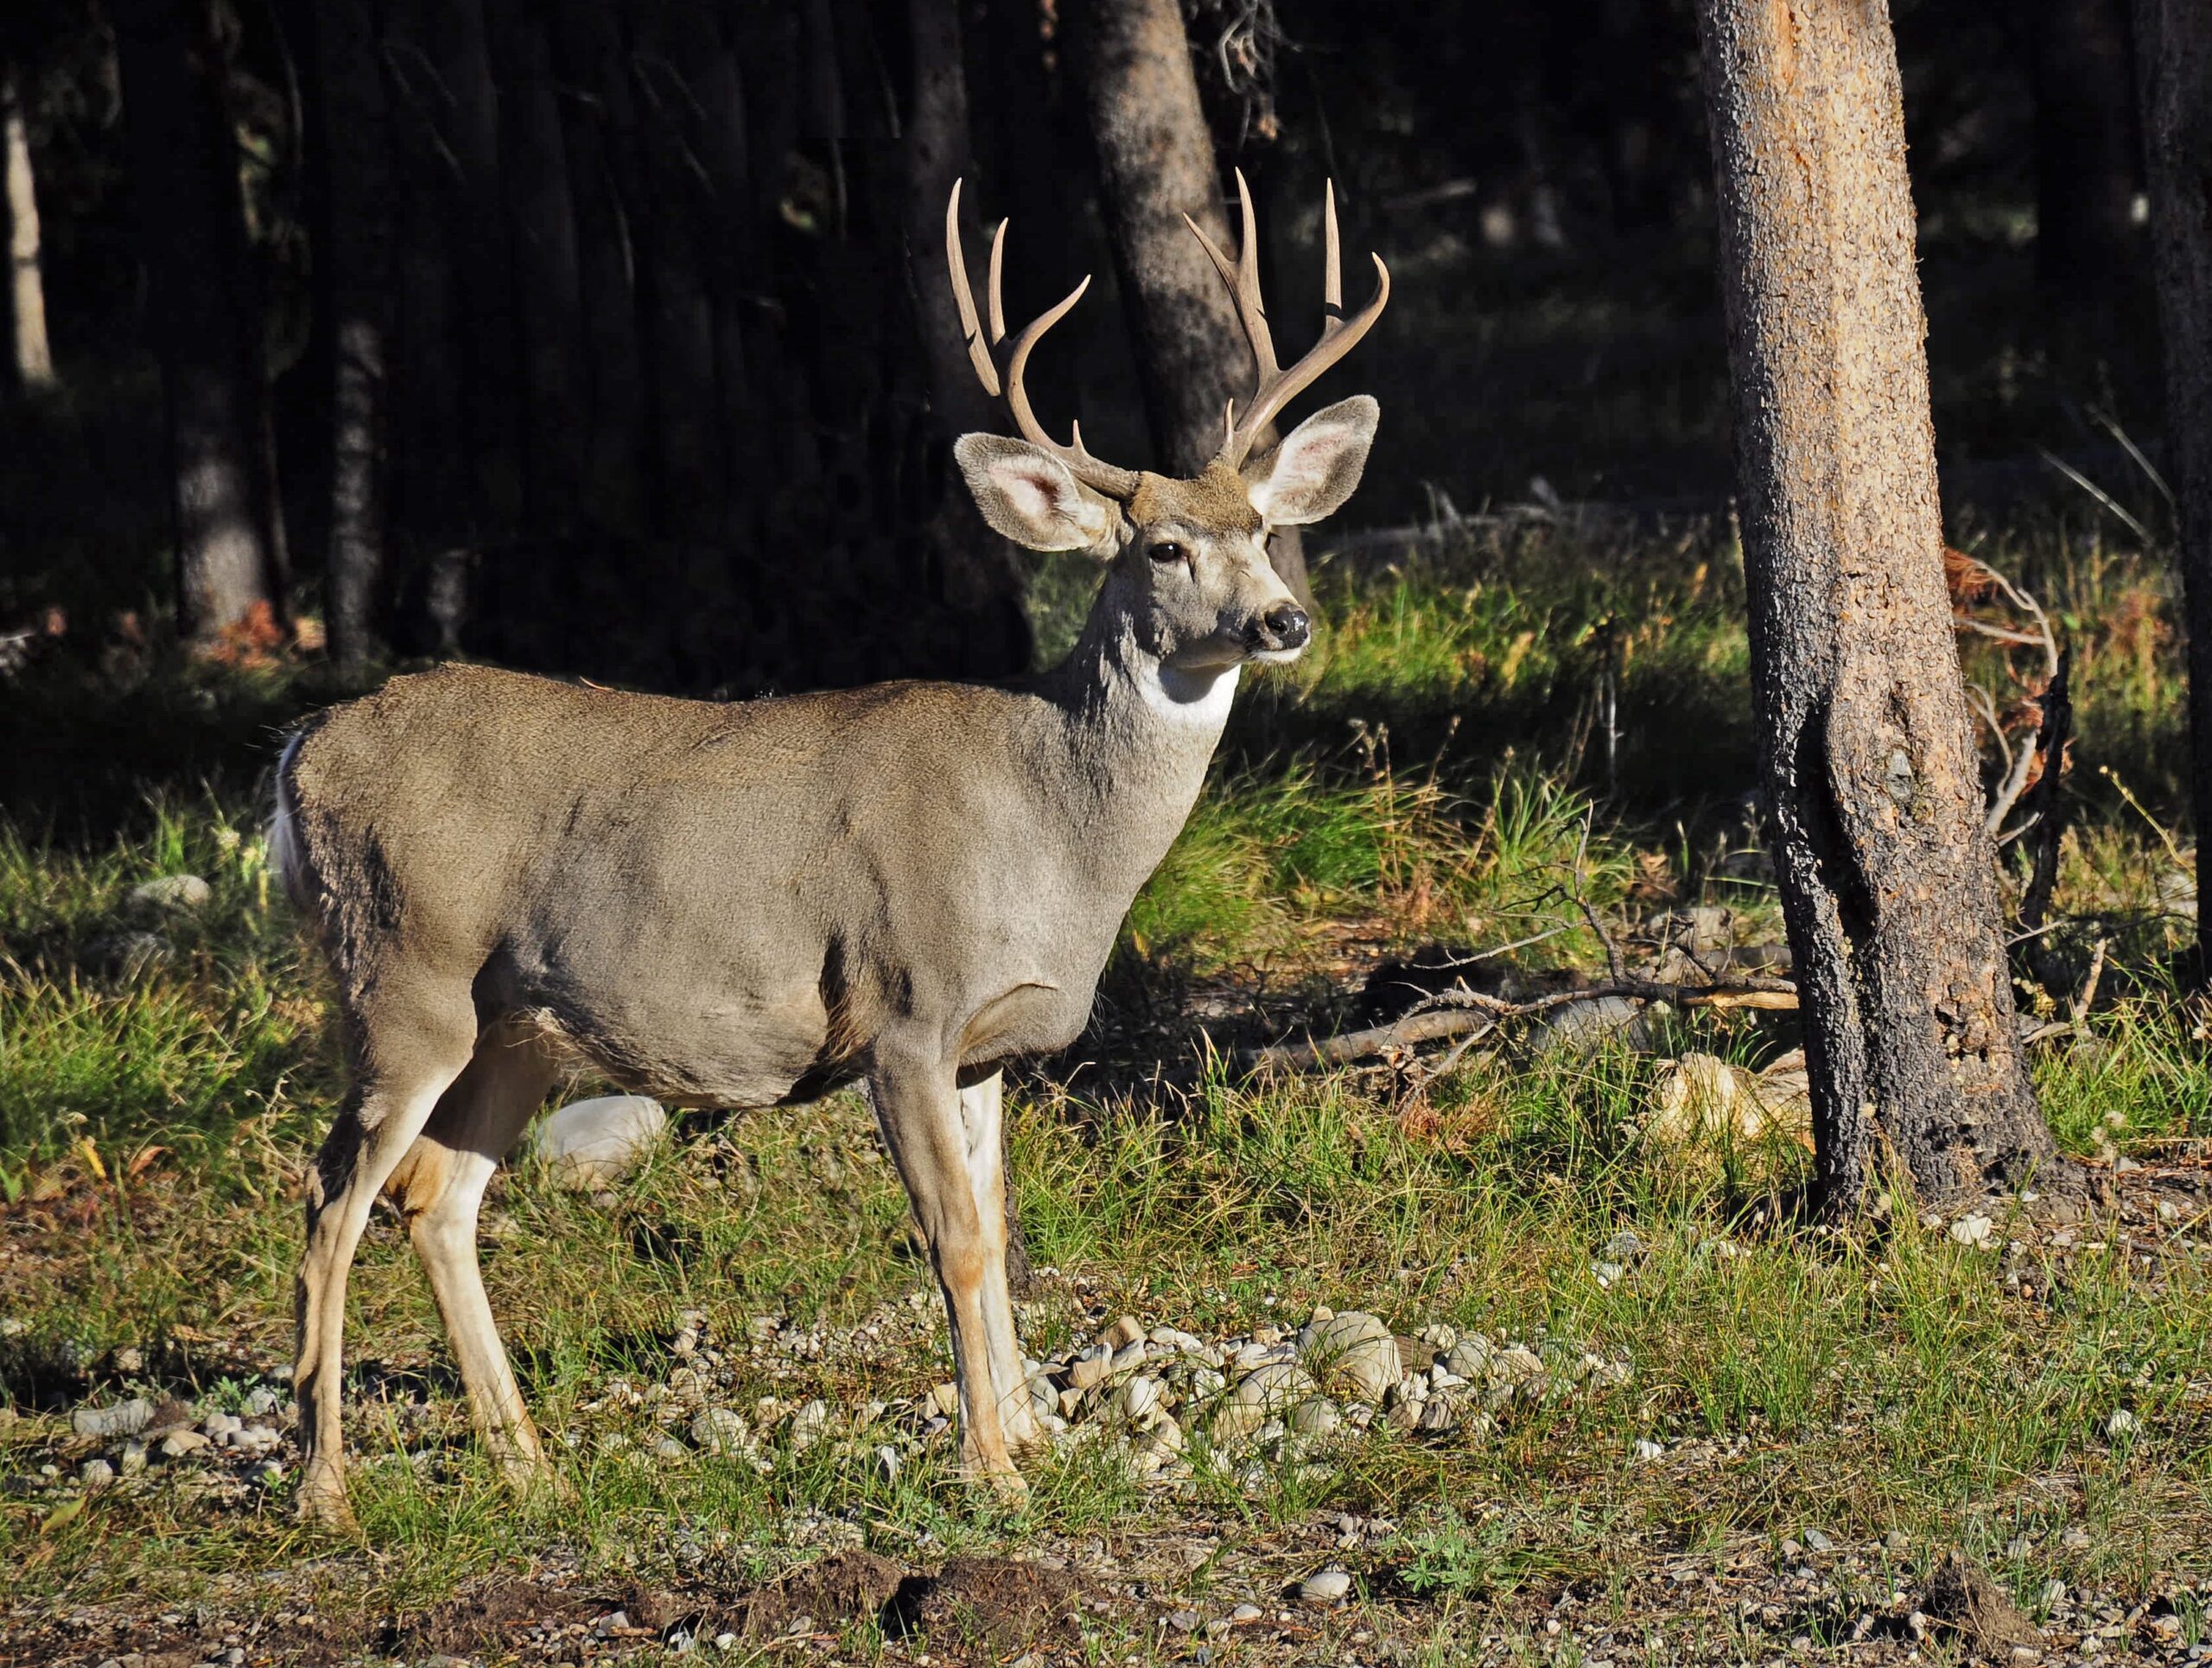 Zombie Deer Disease a ‘Slow Moving Disaster’ for Humans, Scientists Warn